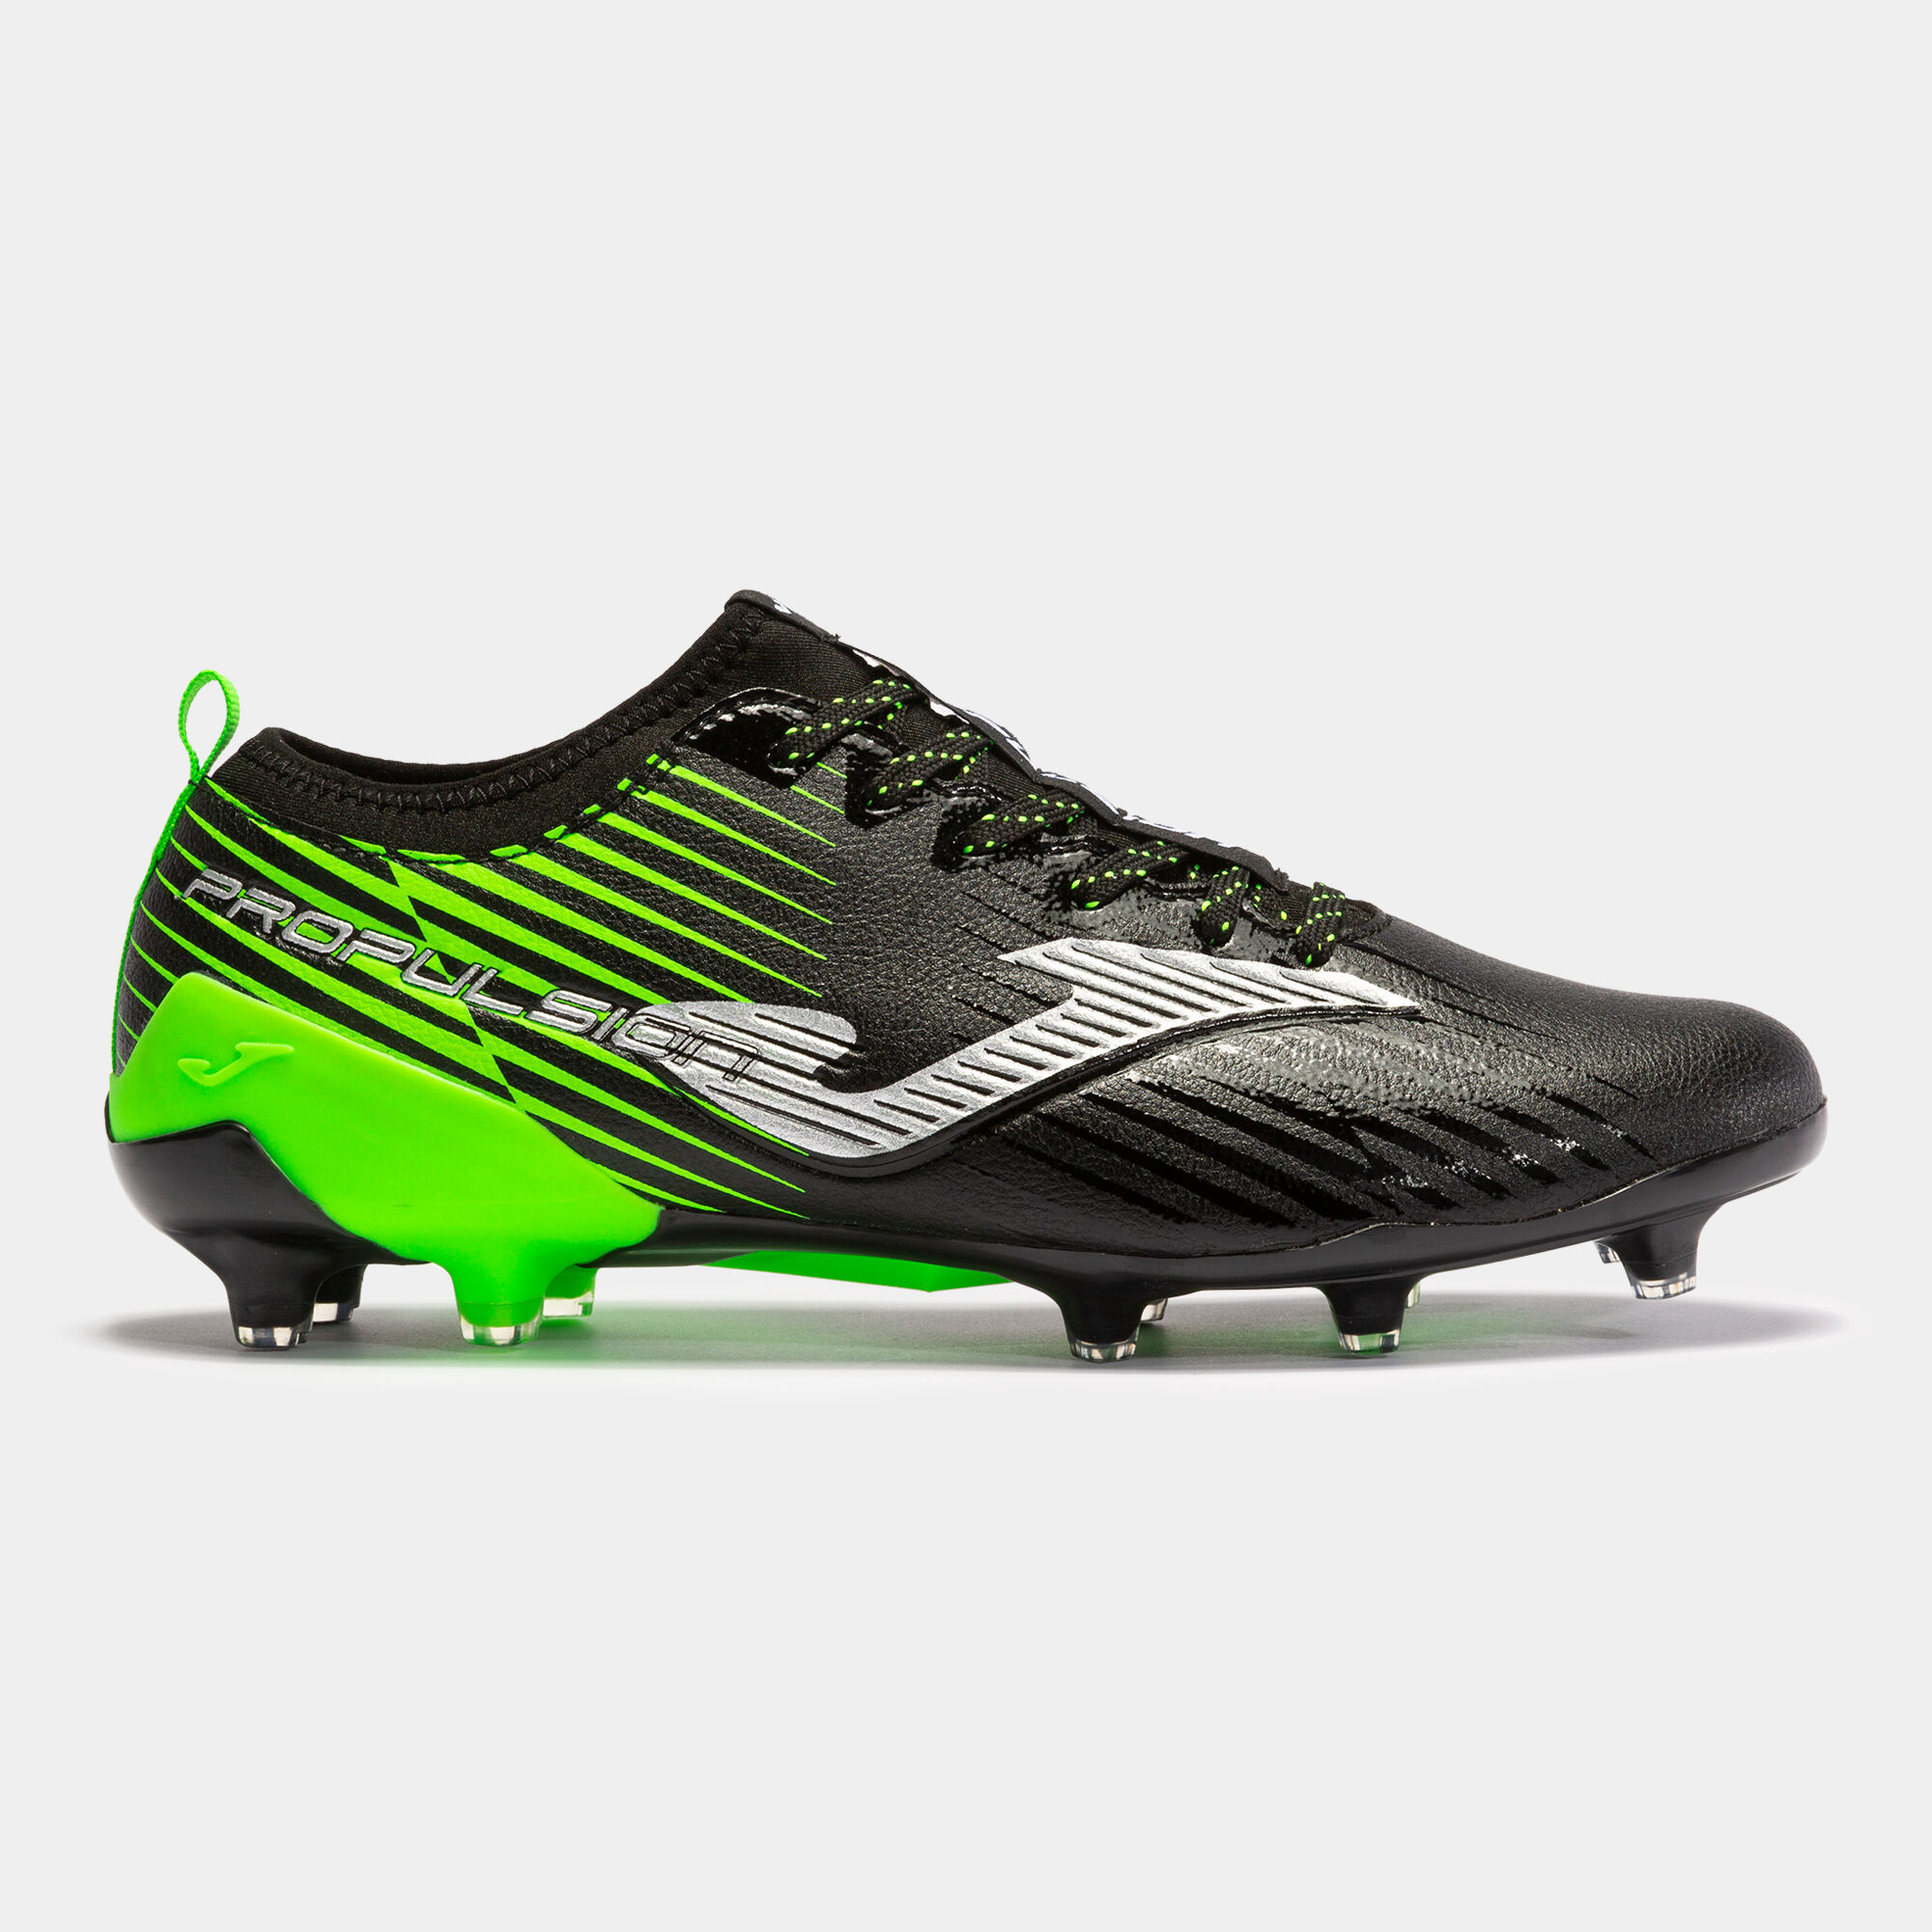 Football boots Propulsion Cup 23 firm ground FG black fluorescent green